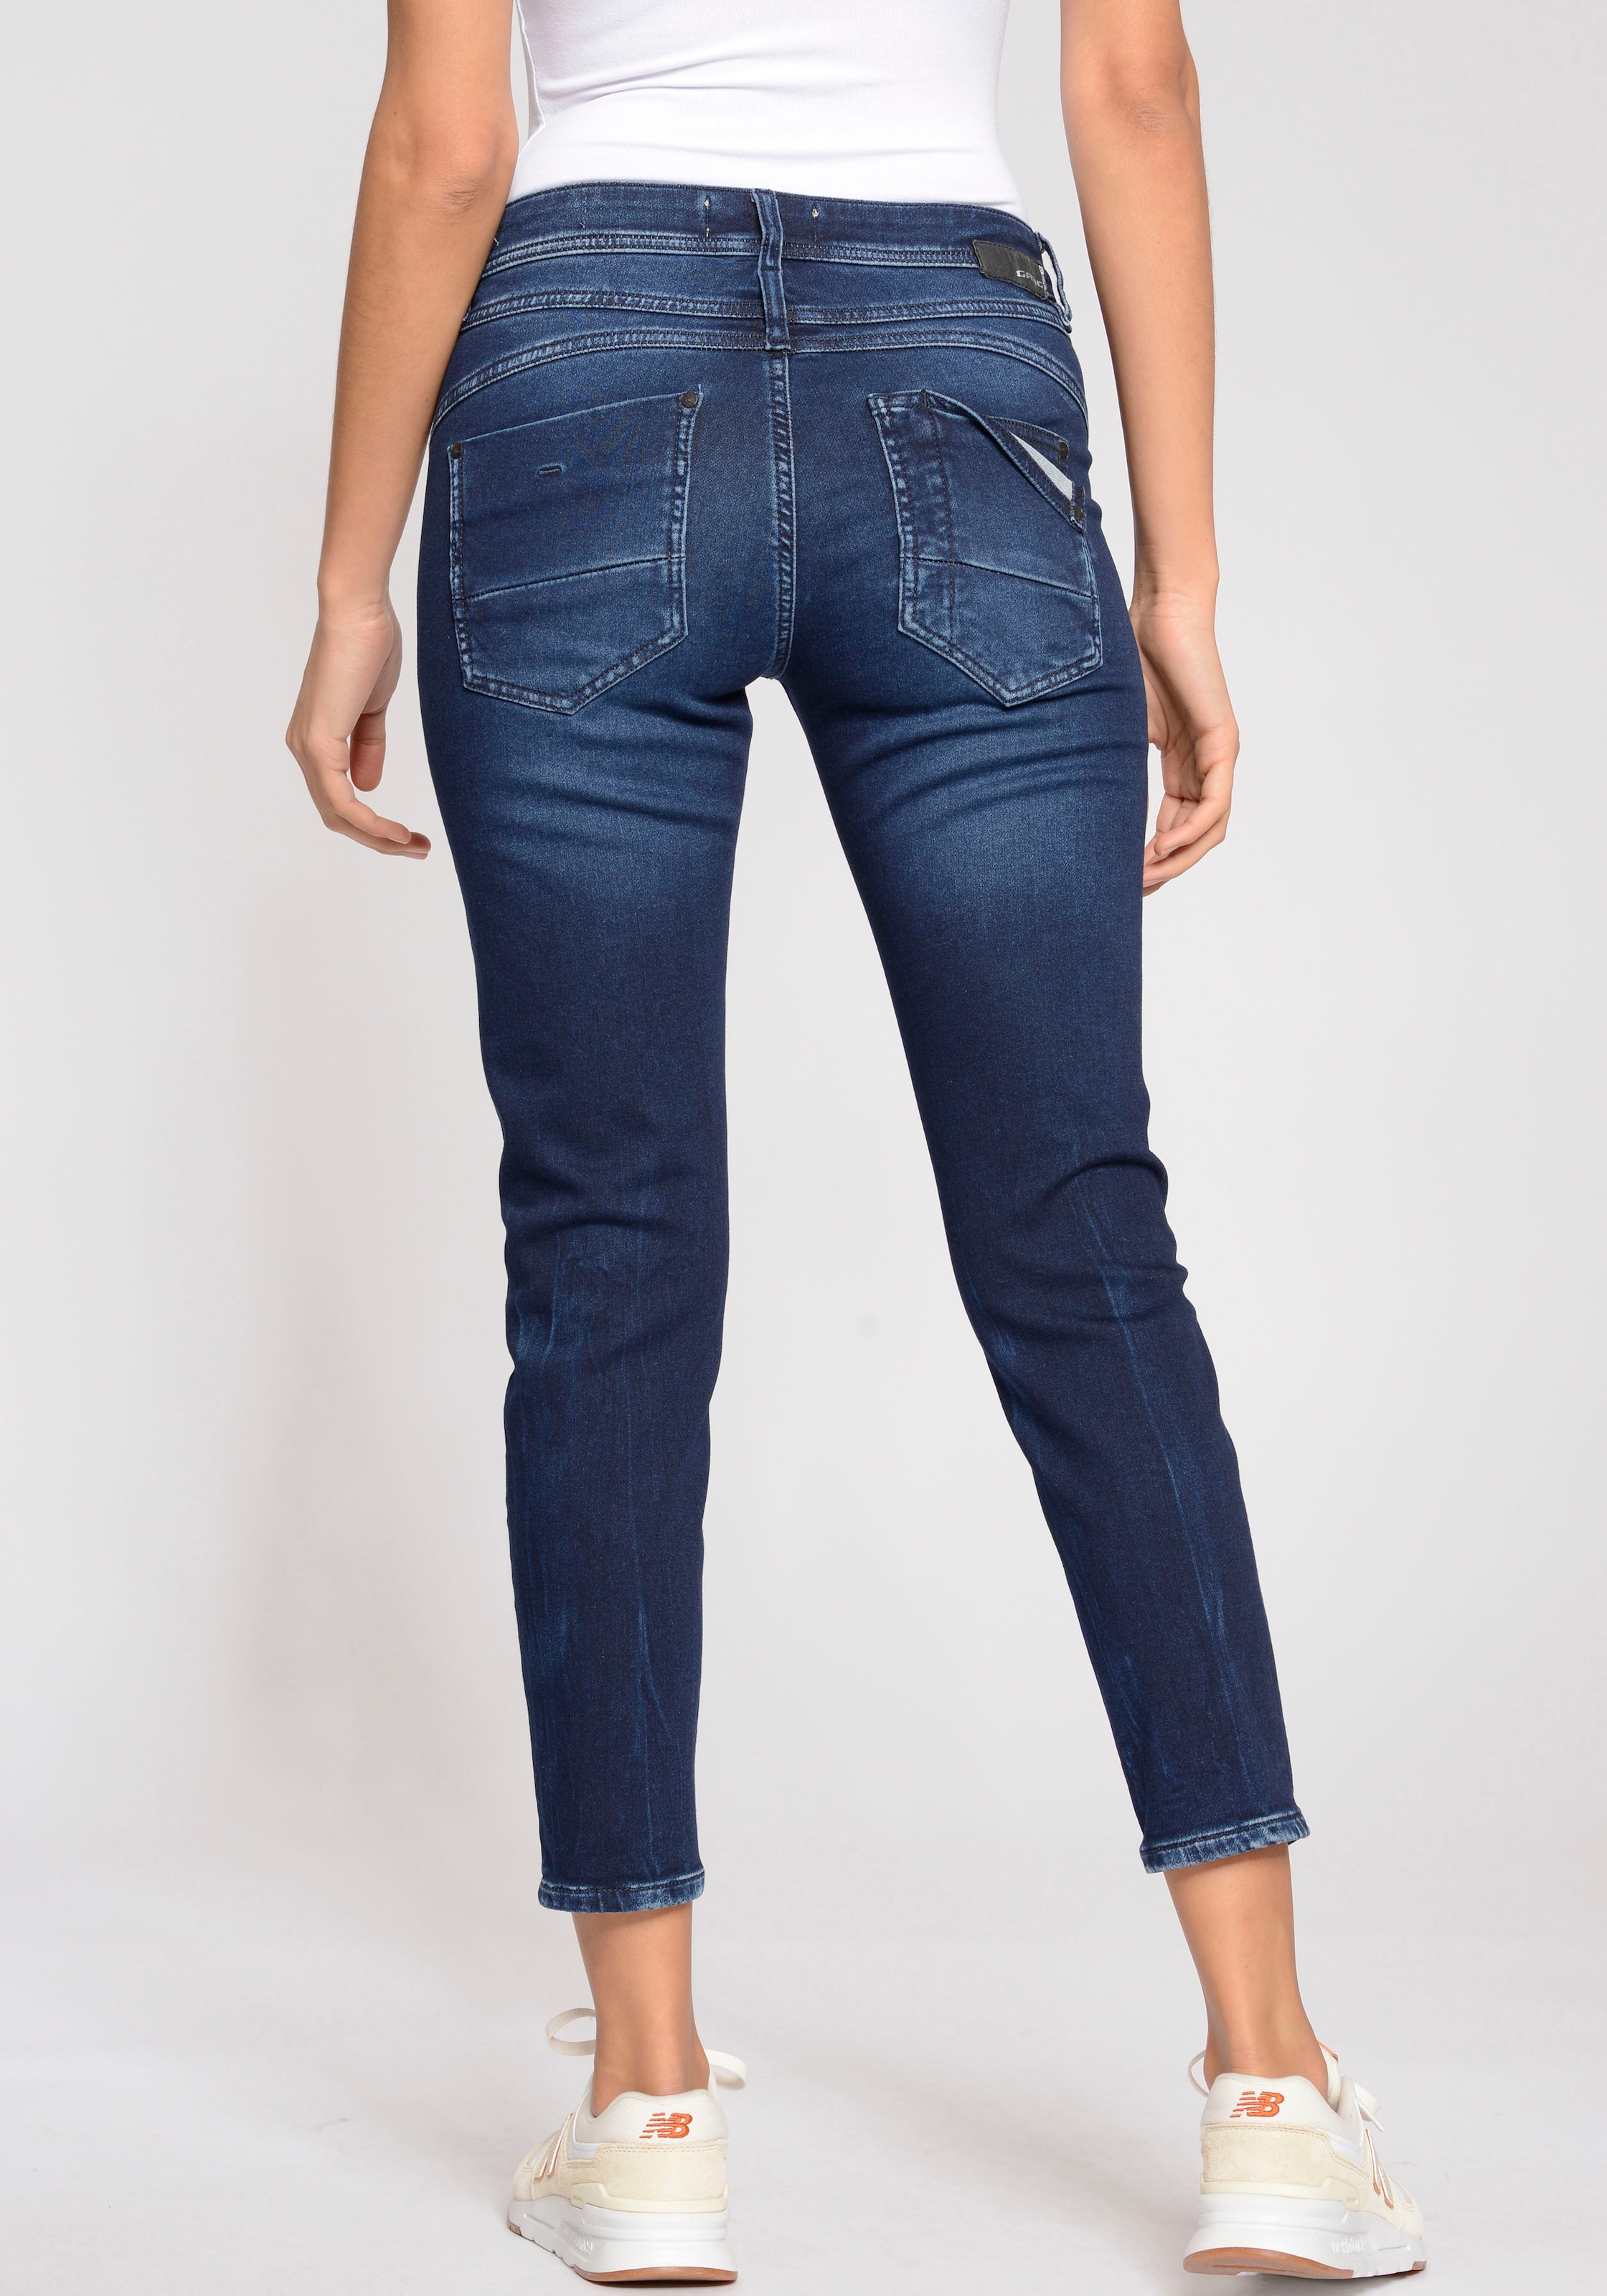 GANG Relax-fit-Jeans »94Amelie Cropped« kaufen OTTO bei